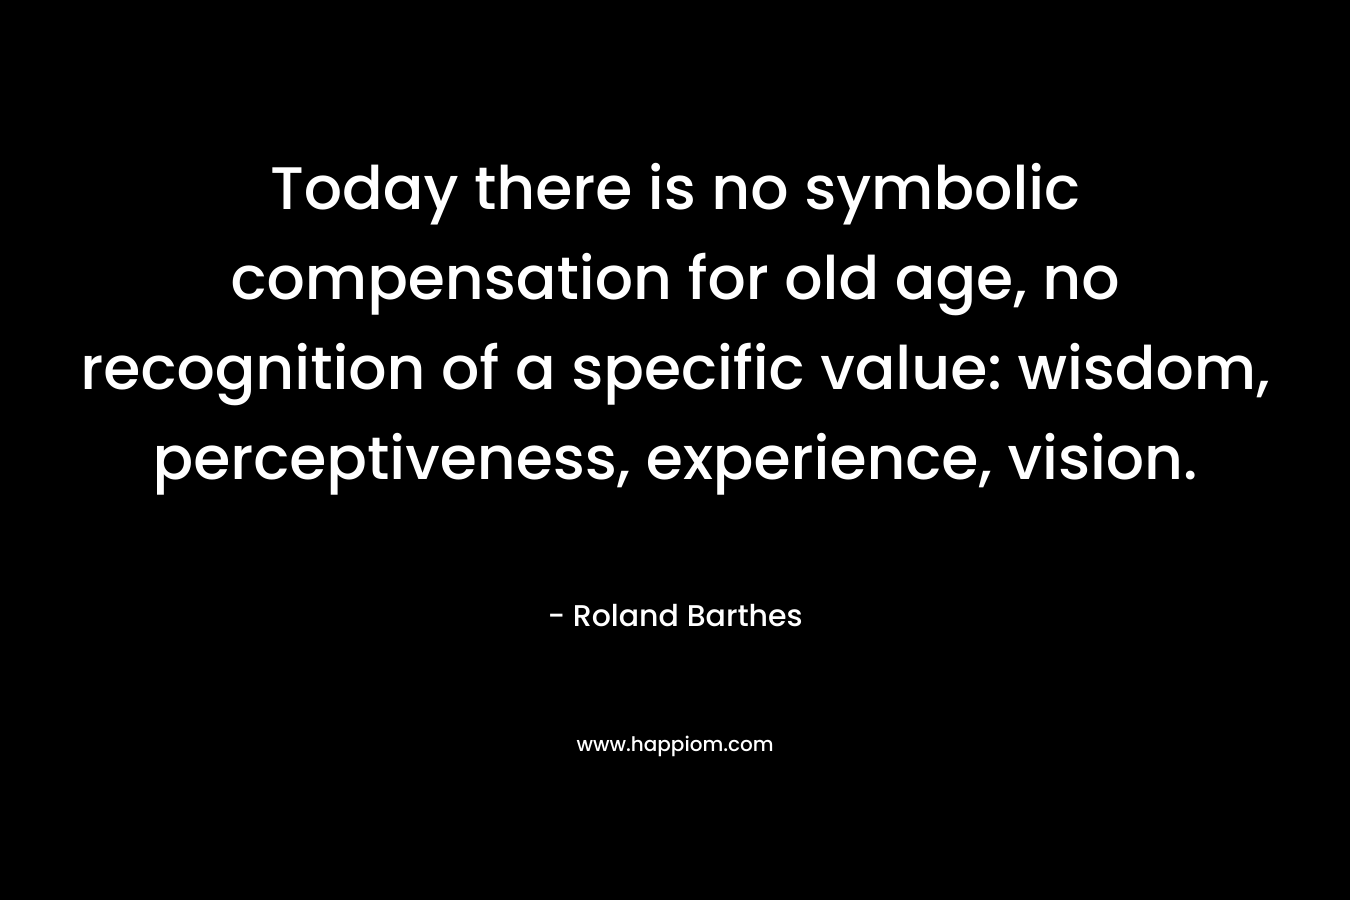 Today there is no symbolic compensation for old age, no recognition of a specific value: wisdom, perceptiveness, experience, vision.